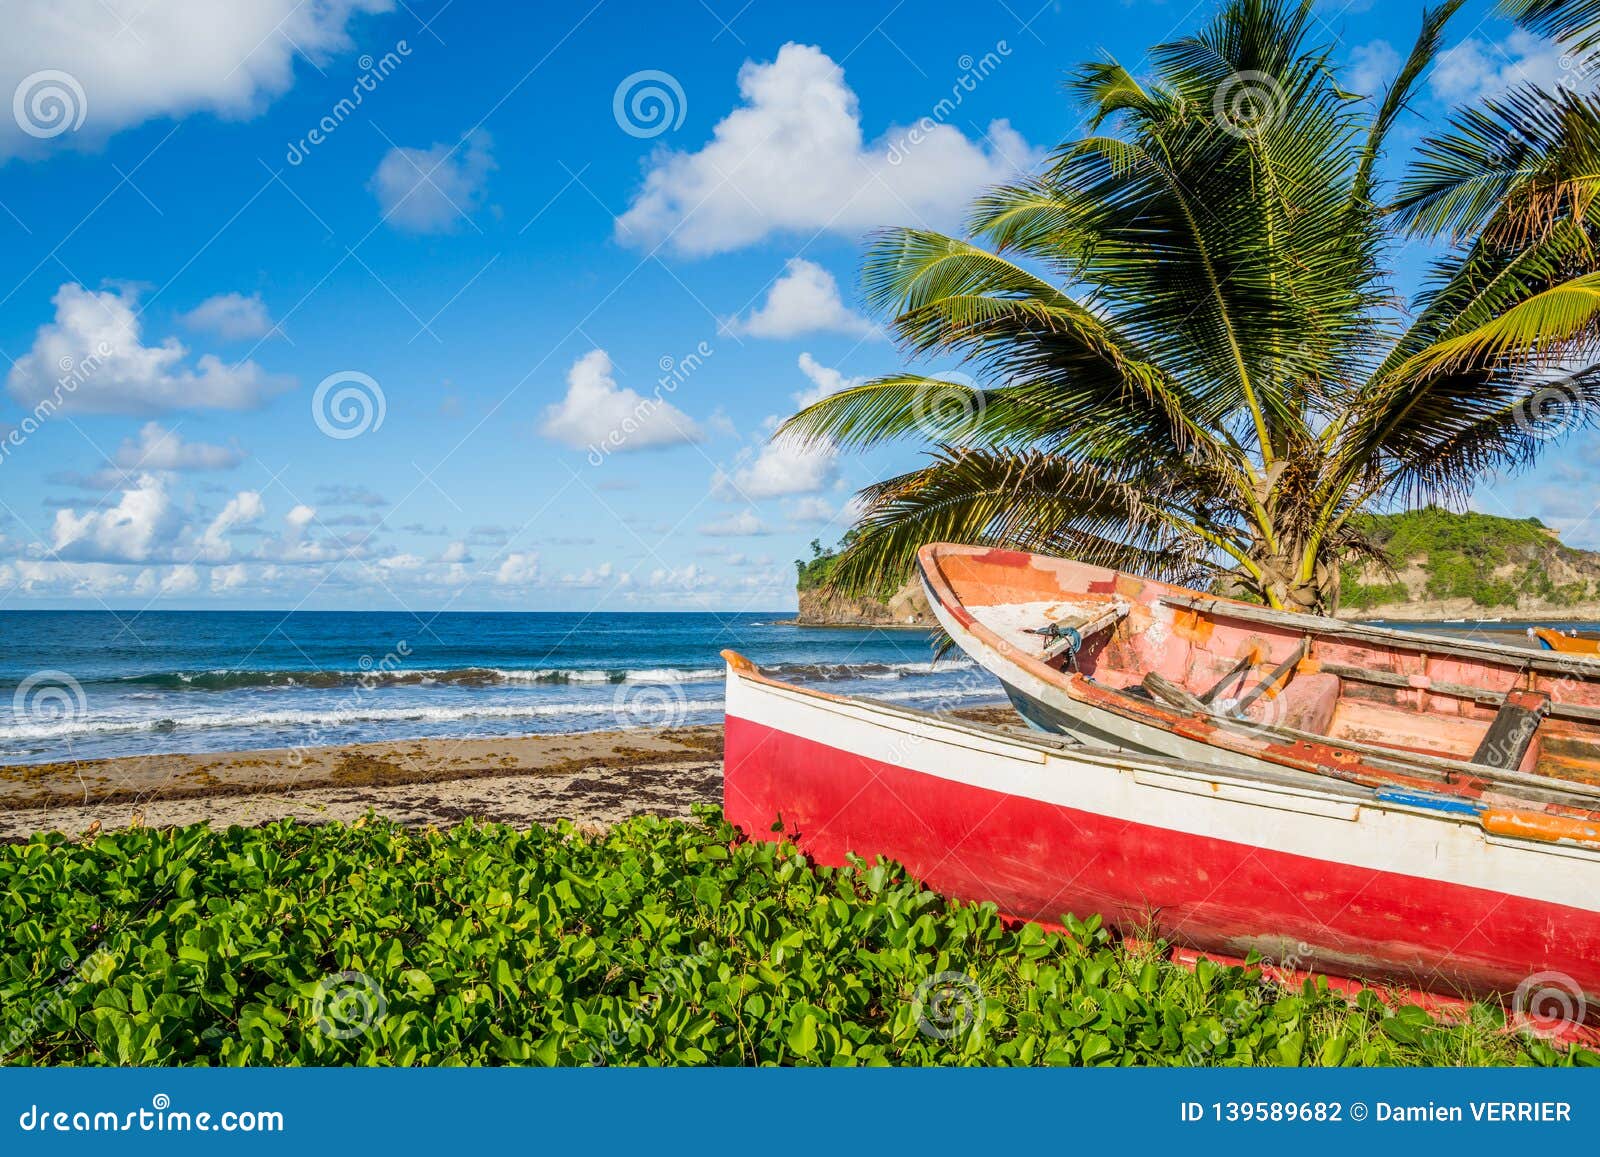 caribbean martinique beach beside traditional fishing boats